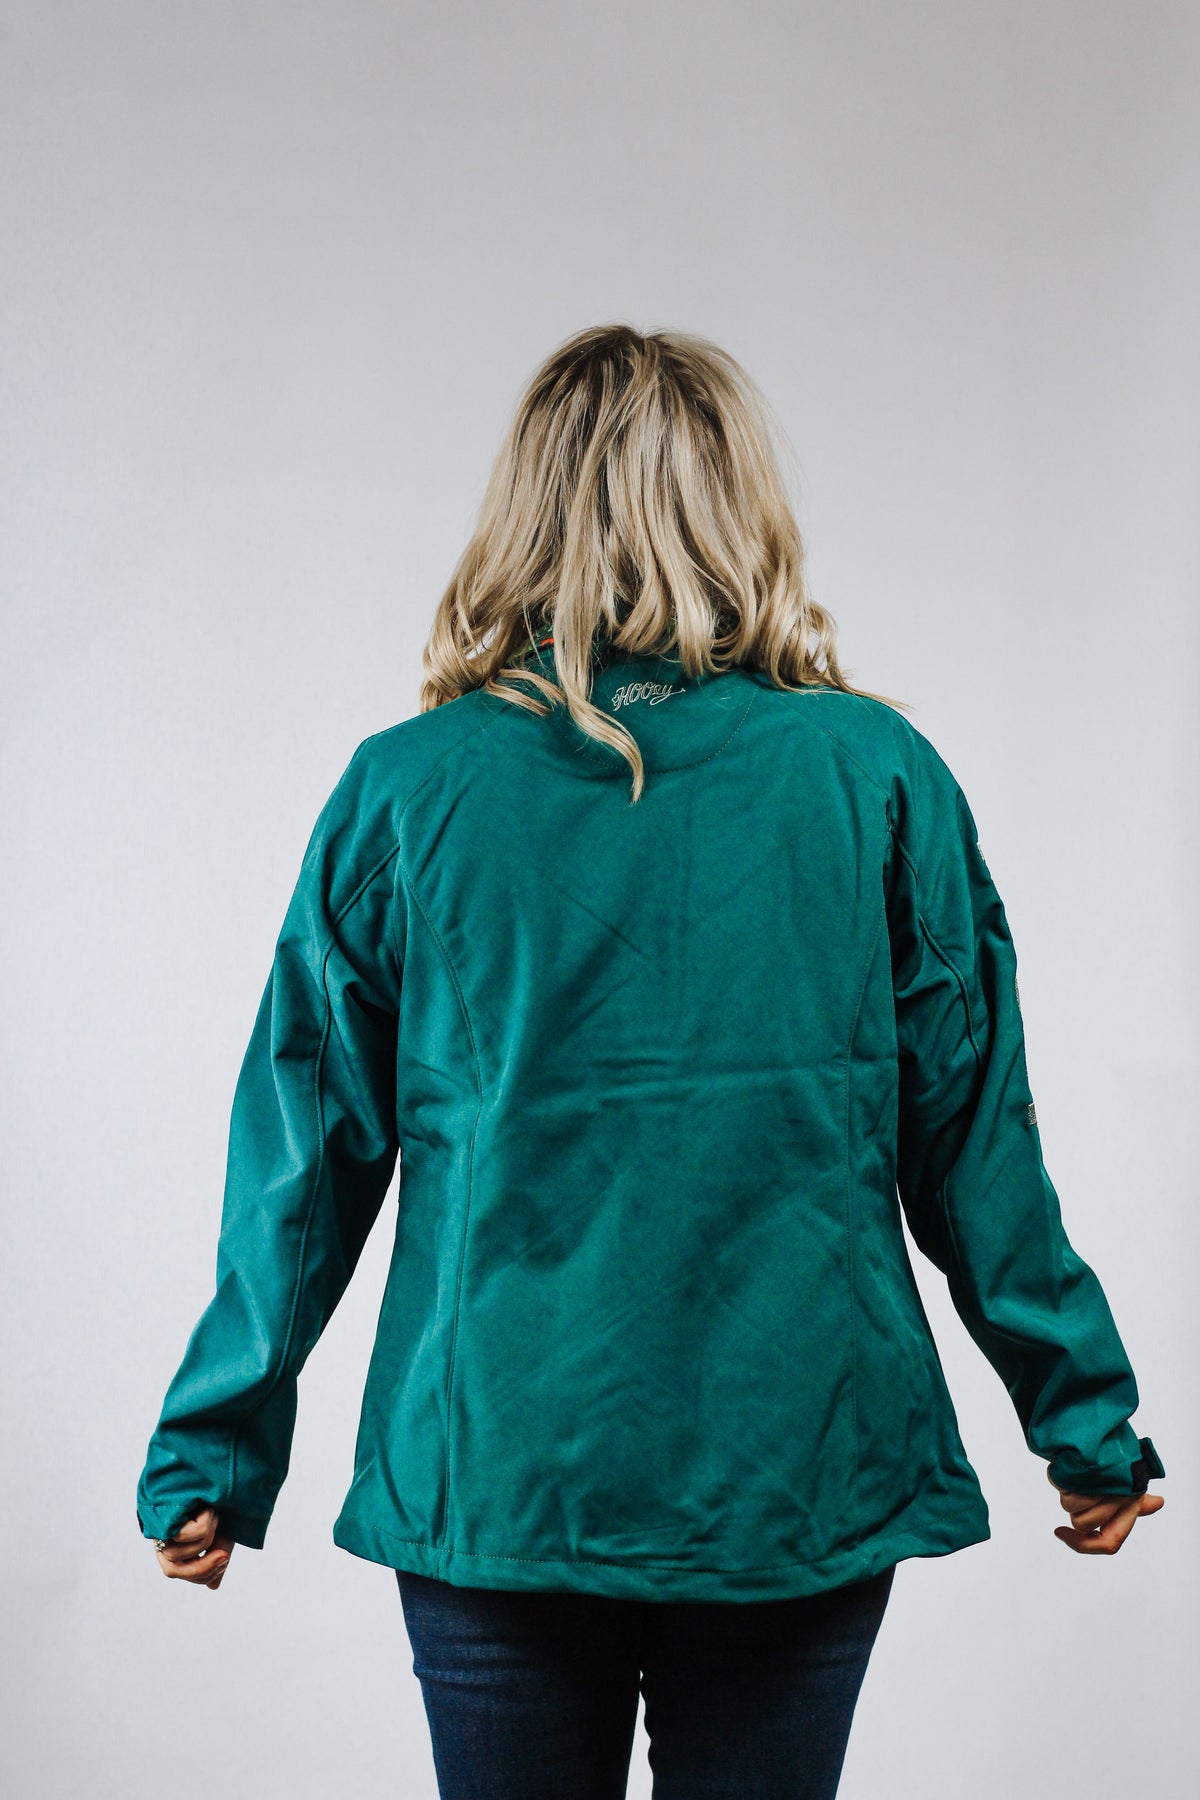 Ladies Soft Shell Jacket By Hooey Teal